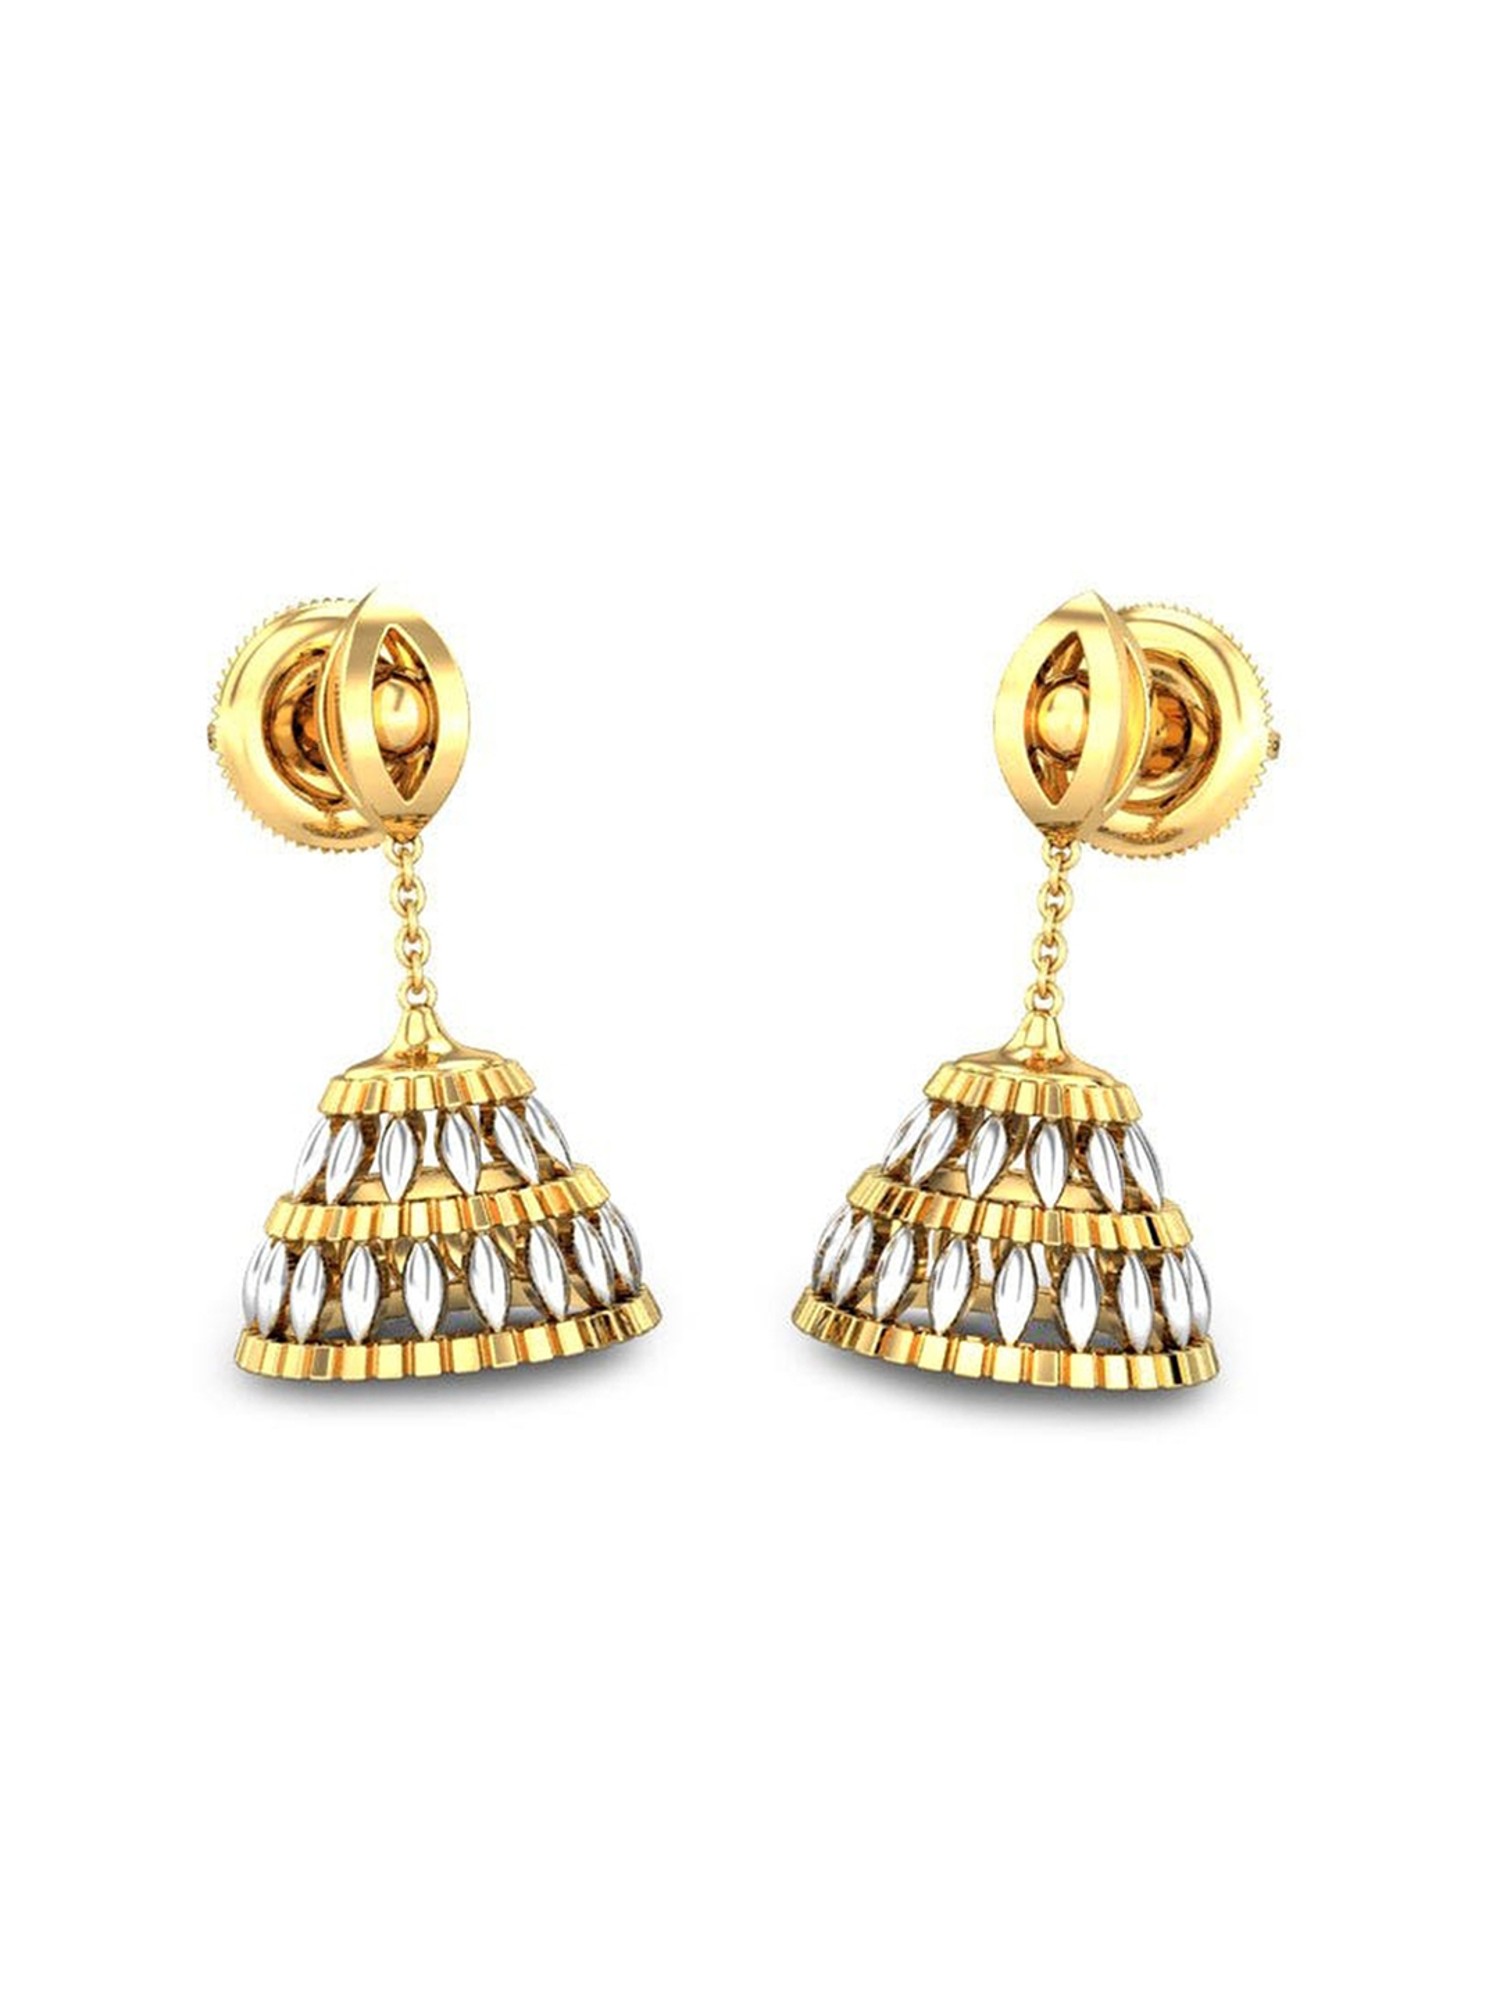 Buy Candere by Kalyan Jewellers 18k Drop Earrings Online At Best Price   Tata CLiQ